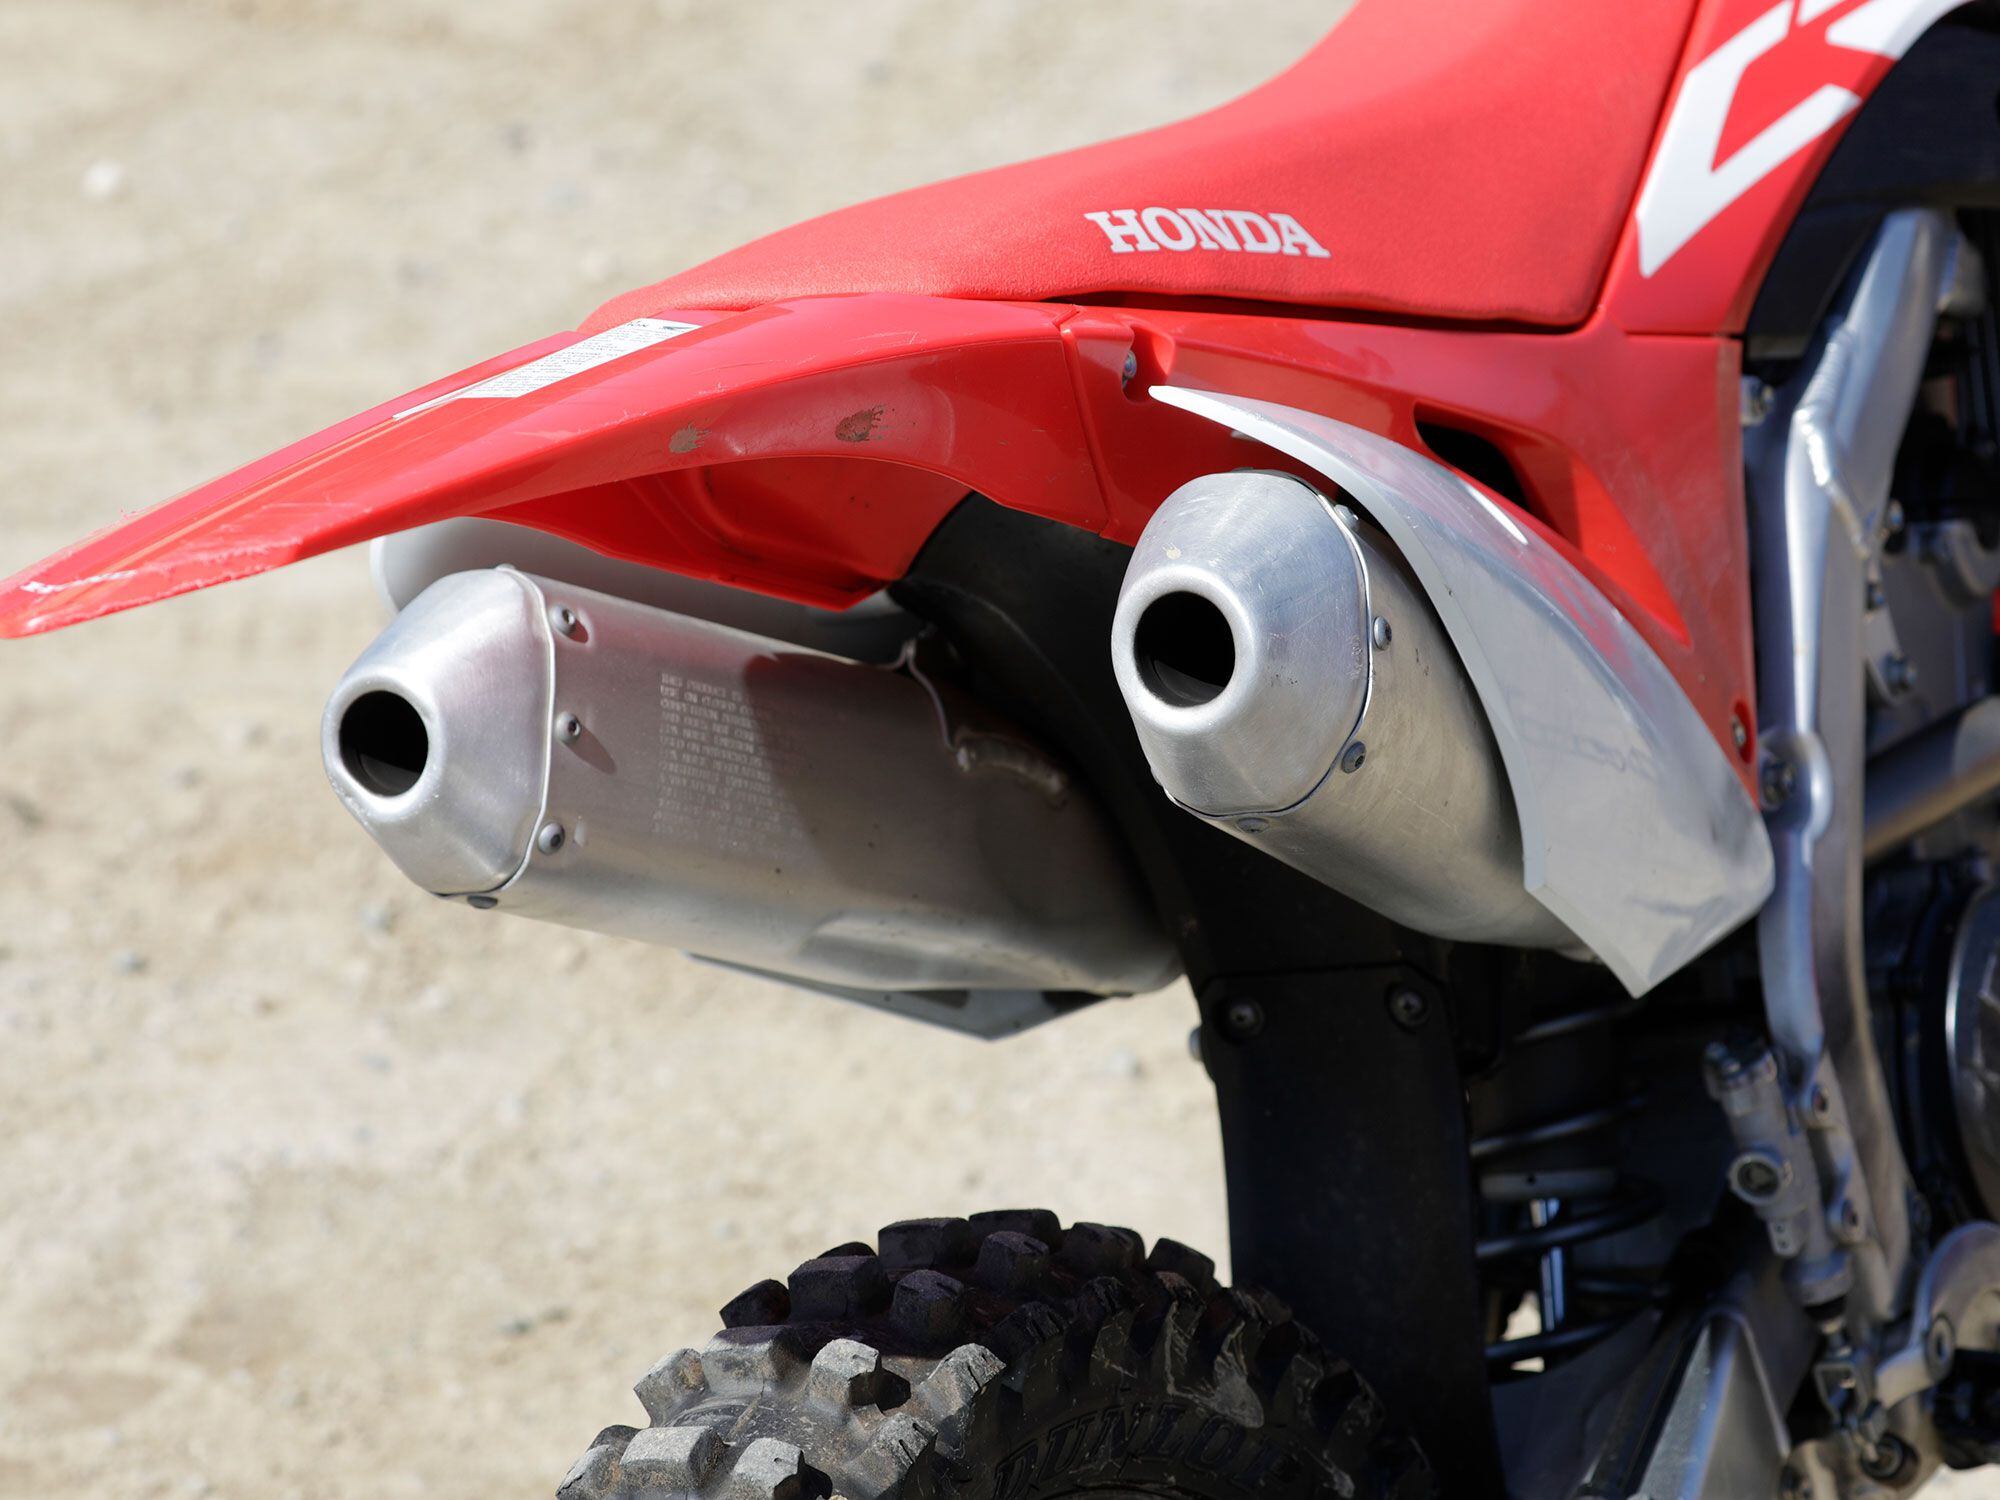 The CRF250RX uses Honda’s signature twin muffler setup. Big Red says it creates a more balanced motorcycle. We just think it looks (and sounds) cool.